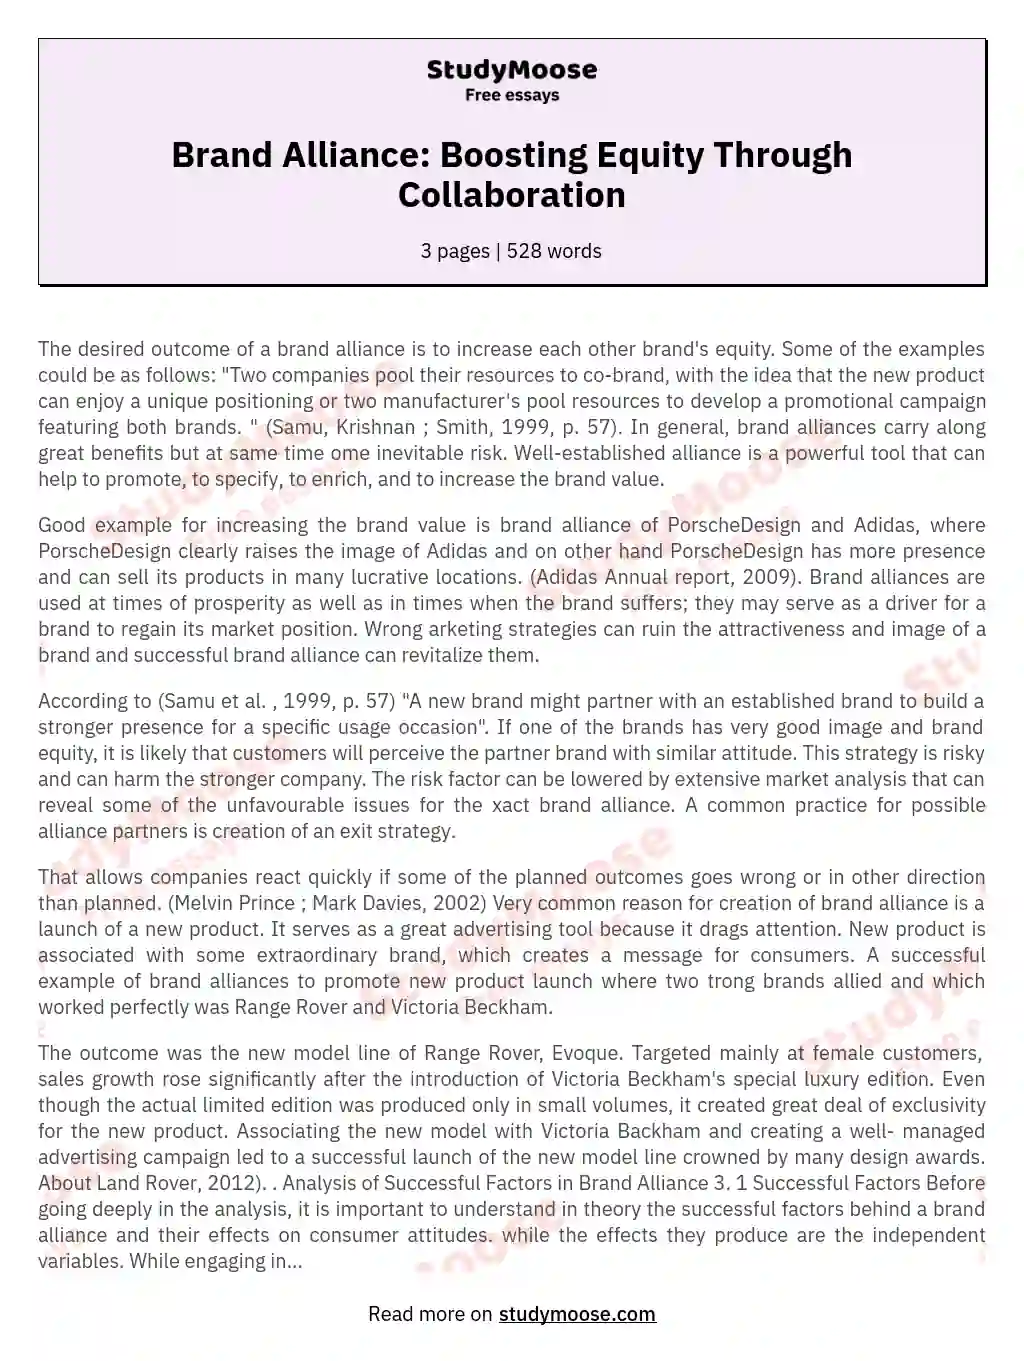 Brand Alliance: Boosting Equity Through Collaboration essay